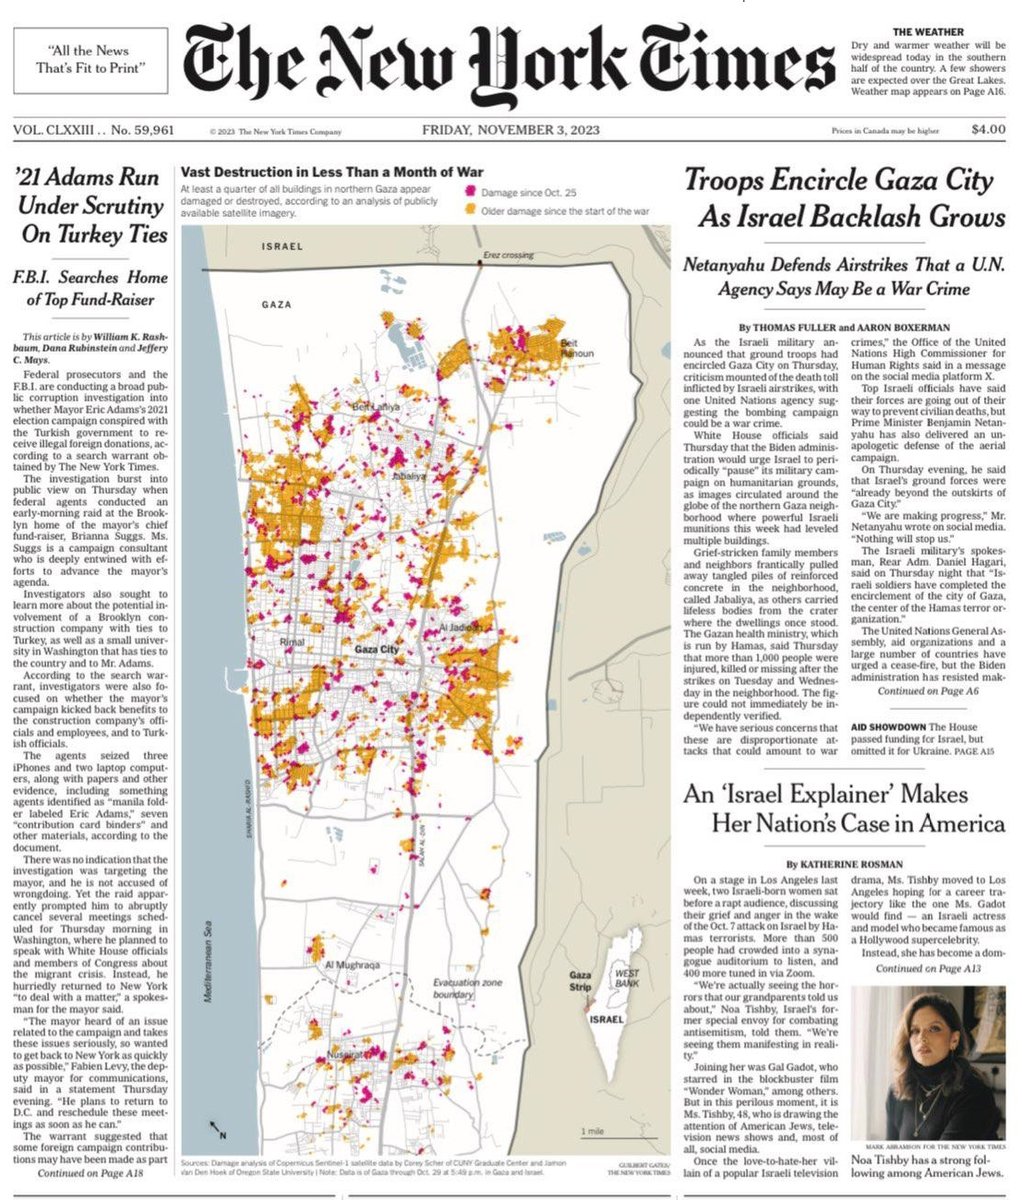 Our satellite radar based damage map of Gaza is on the front page of the New York Times today. This is the result of a collaboration with @coreymaps and @wallacetim to document the effects of the war across all of Gaza every 5-6 days.